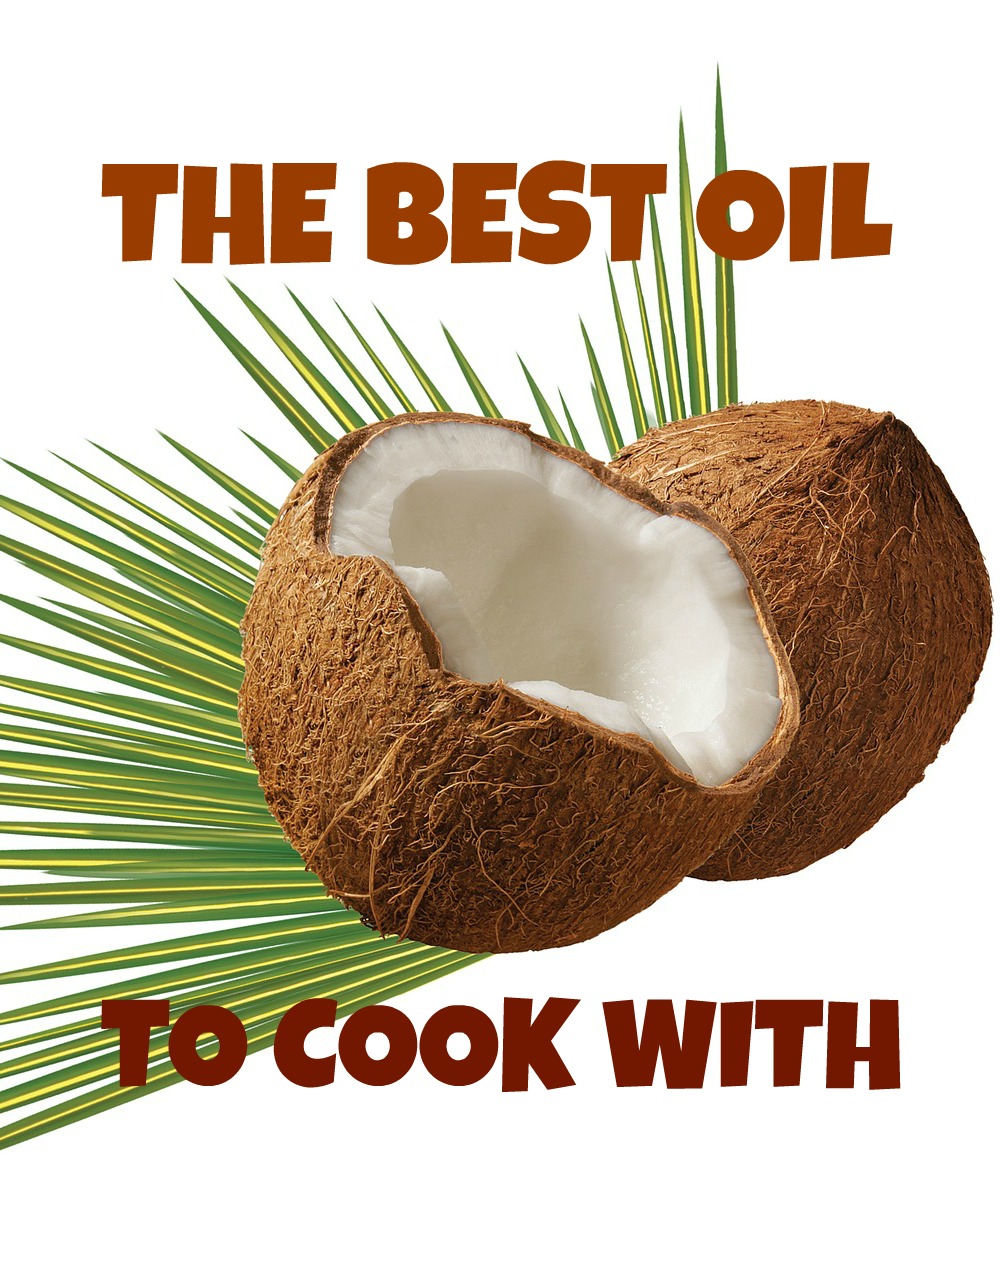 My favourite oil to cook with: coconut oil